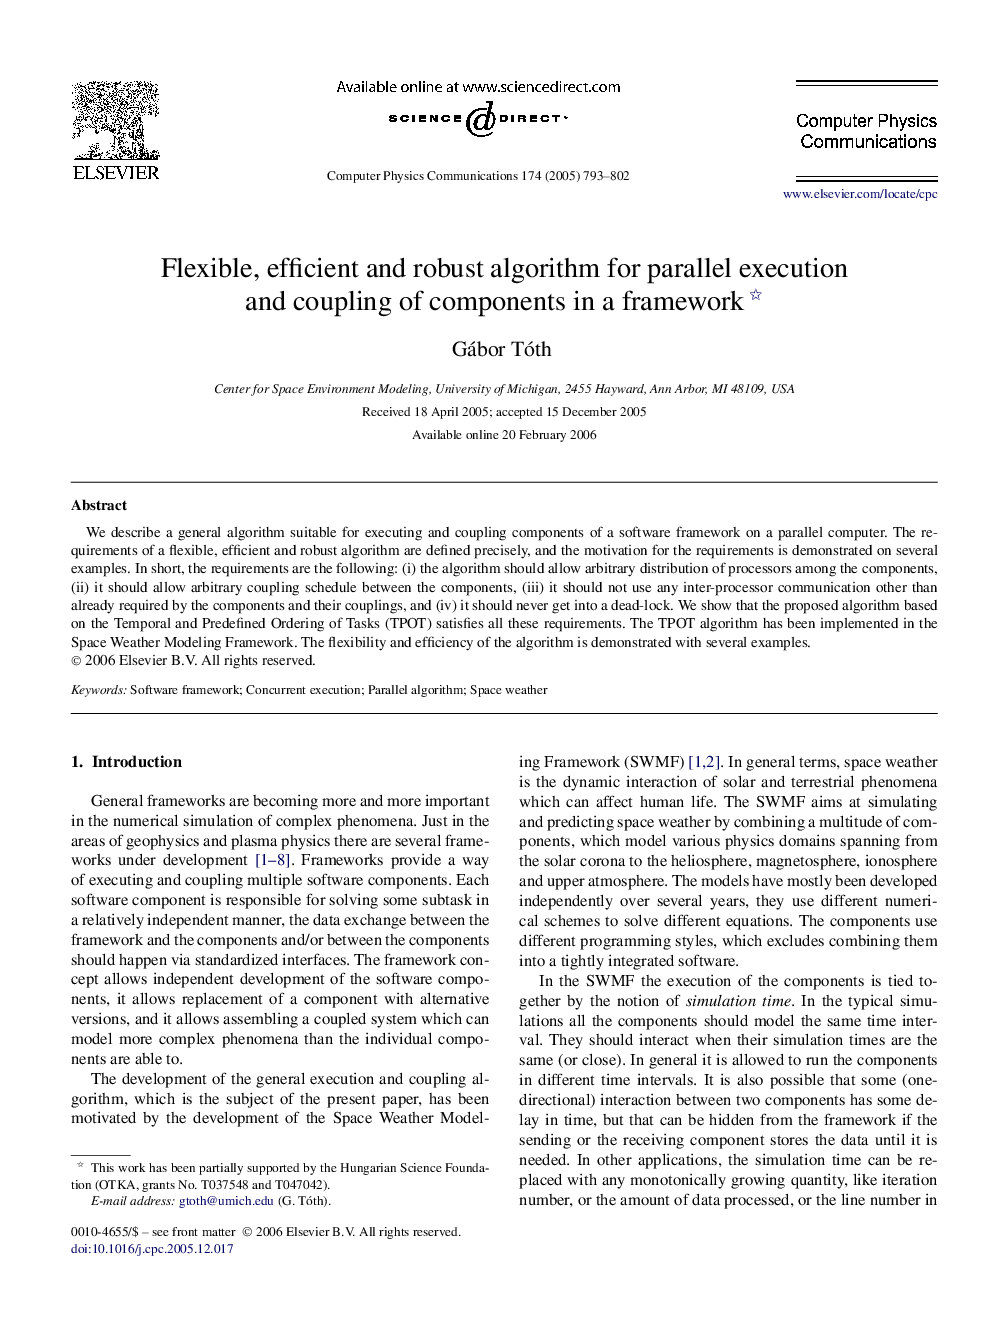 Flexible, efficient and robust algorithm for parallel execution and coupling of components in a framework 